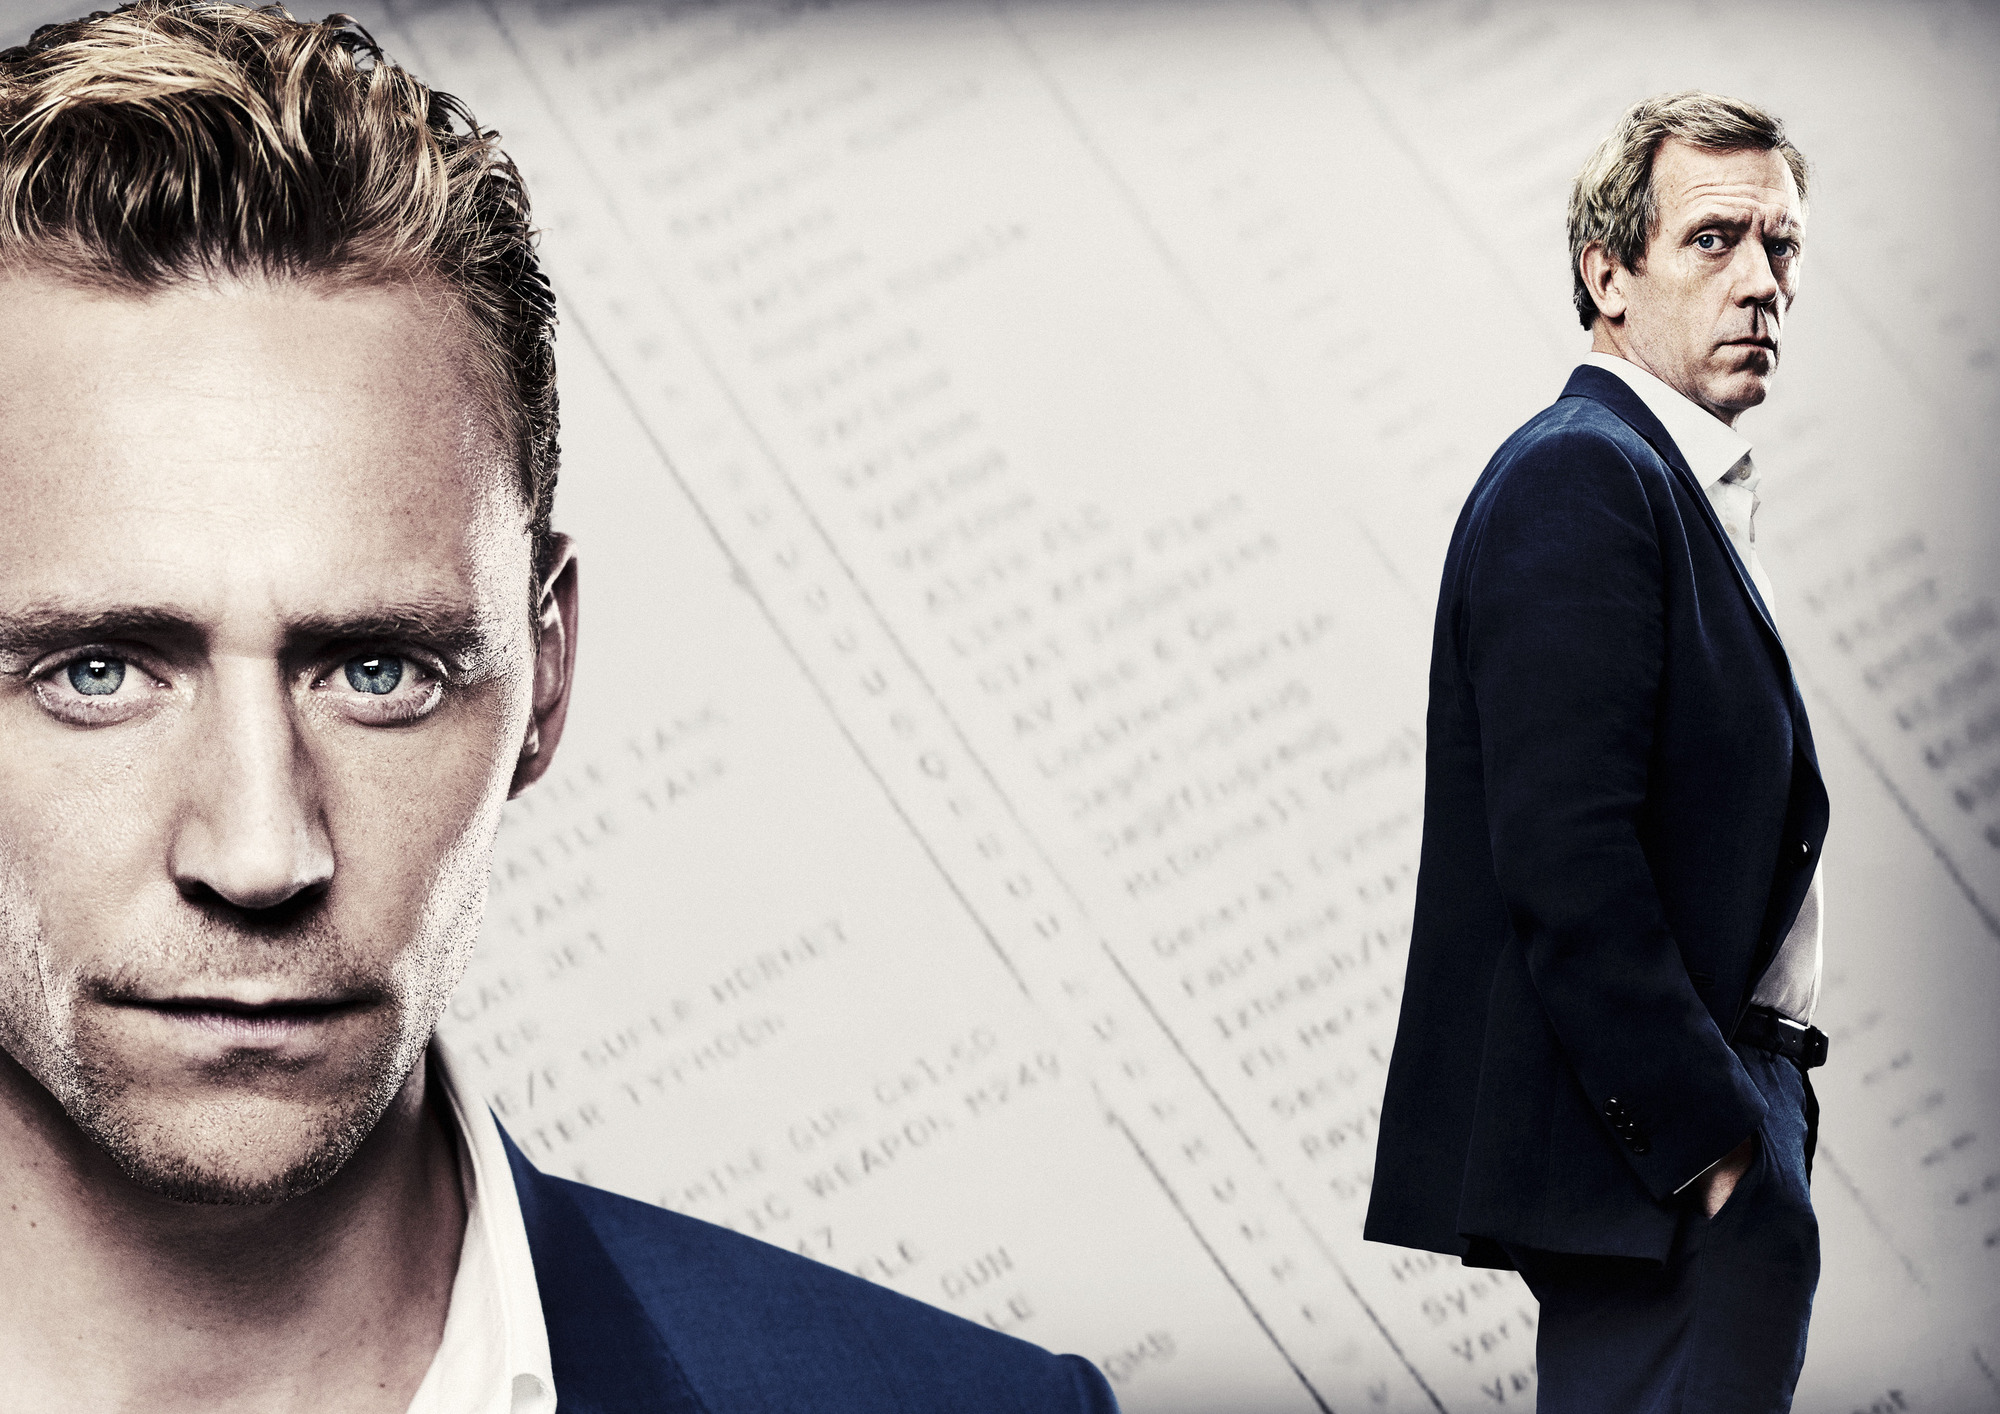 The Night Manager Starring Tom Hiddleston and Hugh Laurie New Poster Released | The ...